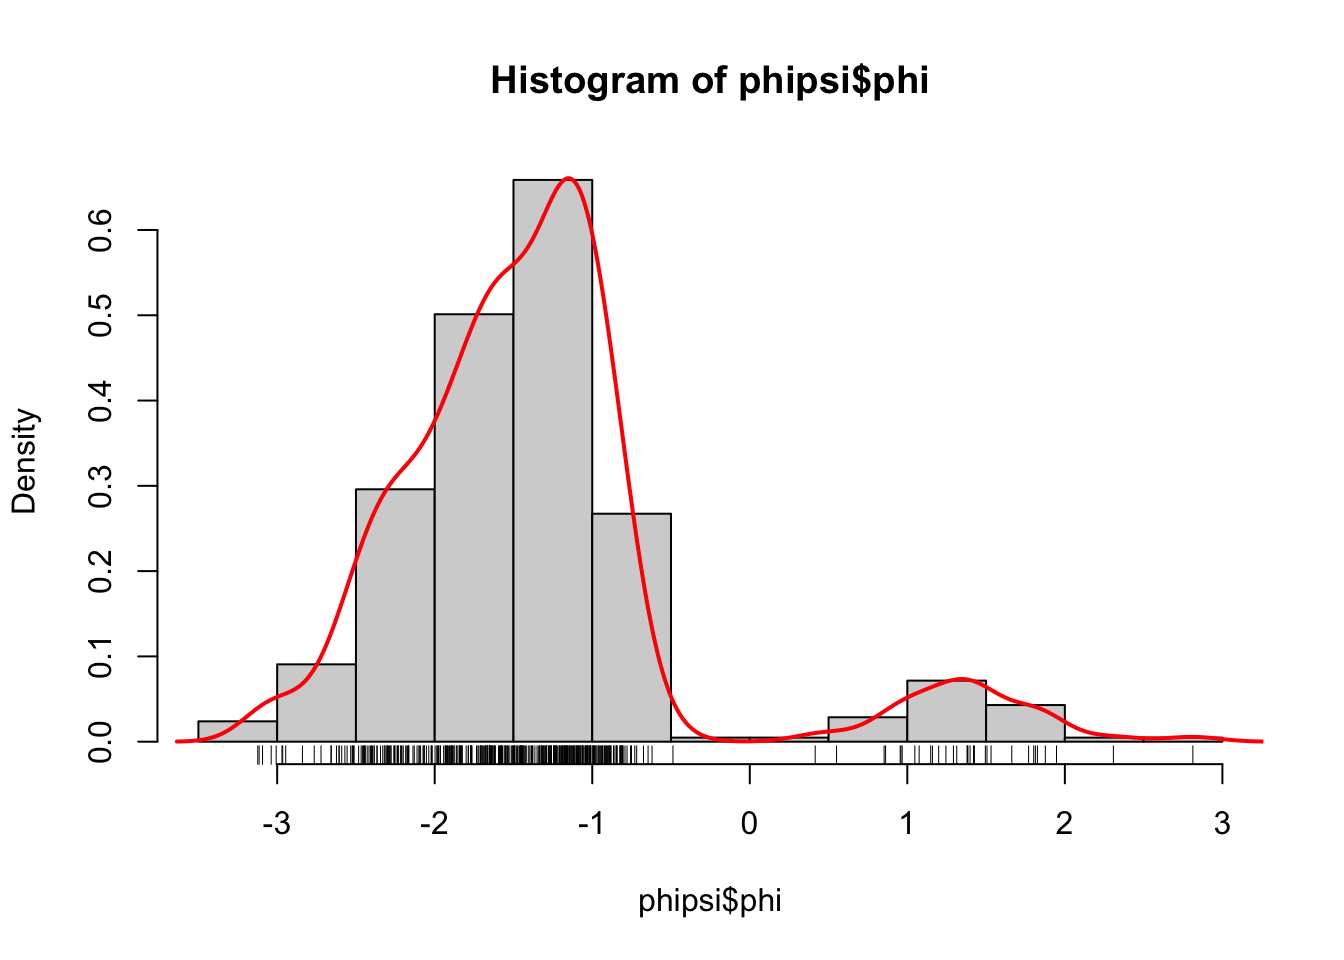 Histograms equipped with a rug plot and smoothed density estimate (red line) of the distribution of \(\phi\)-angles (left) and \(\psi\)-angles (right).